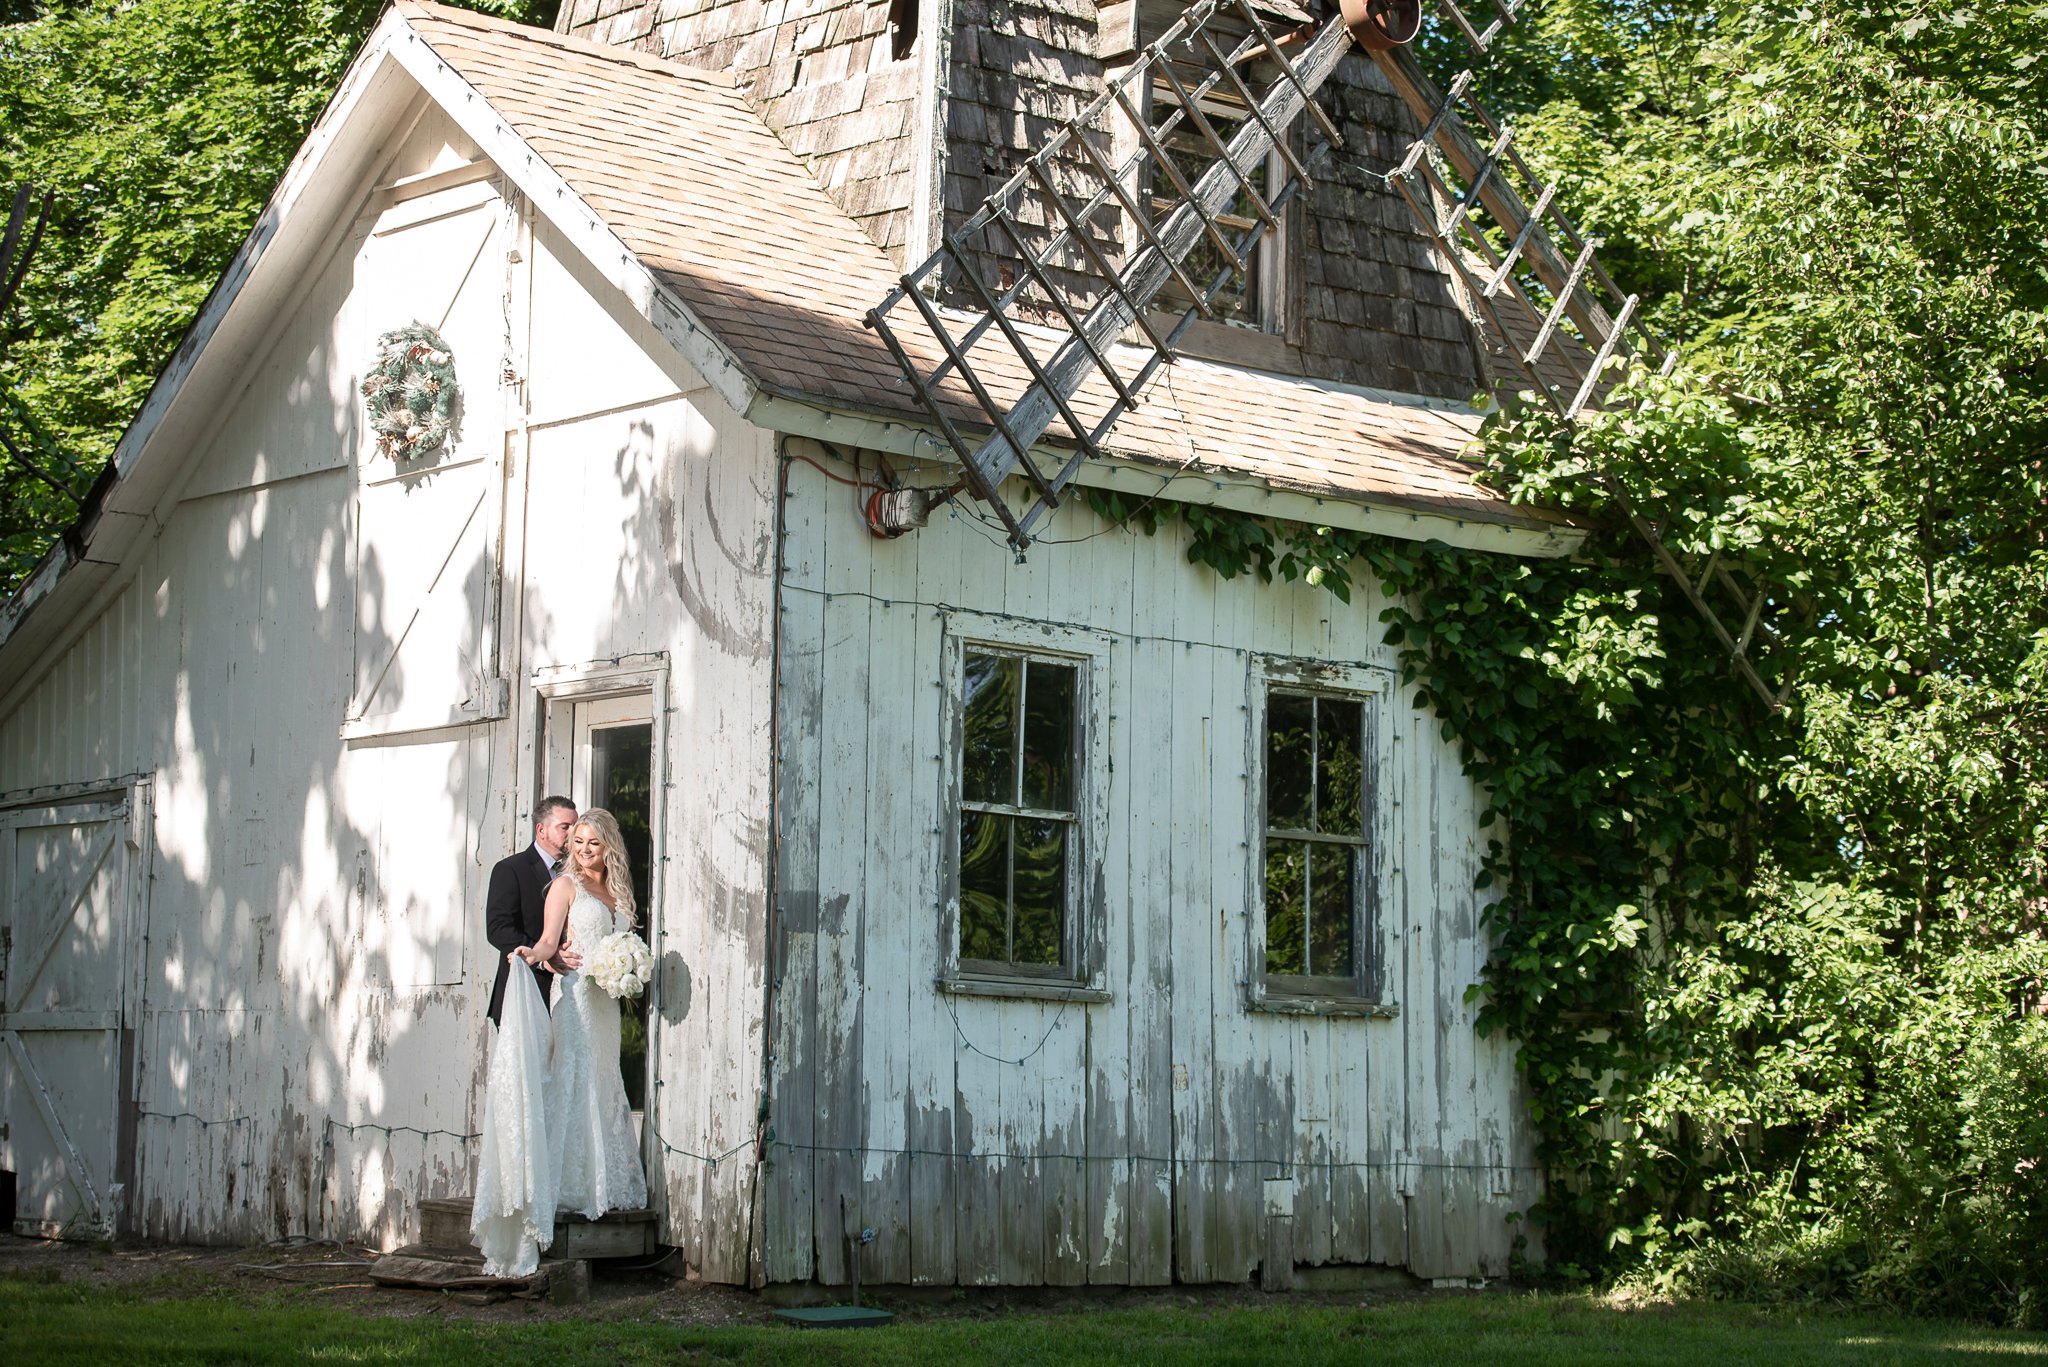 Giorgio's Baiting Hollow - Best Wedding Pictures